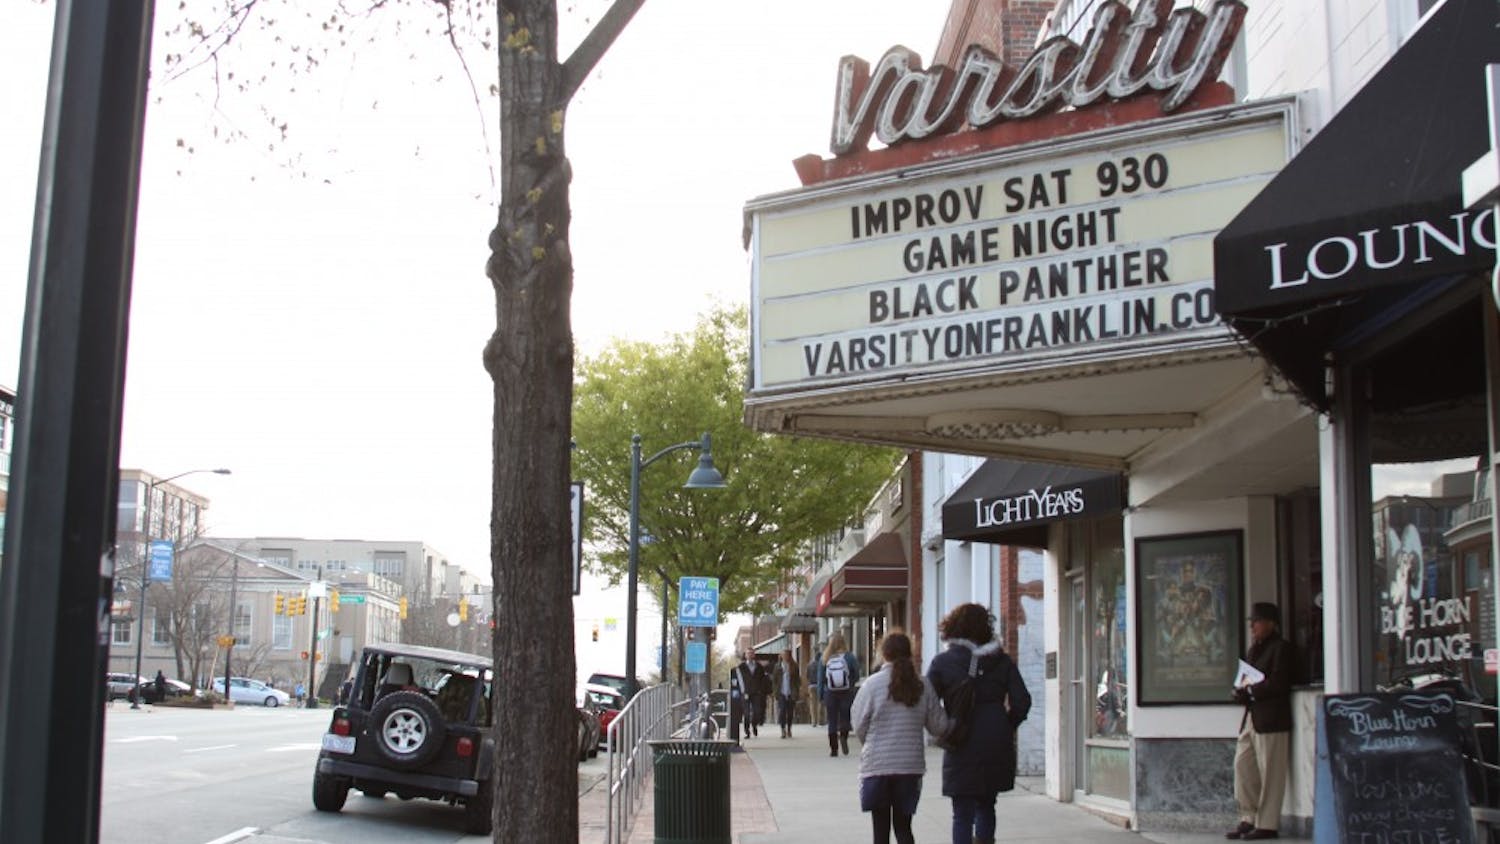 Black Panther, a recent blockbuster hit, is now showing at the Varsity movie theater on Franklin Street.